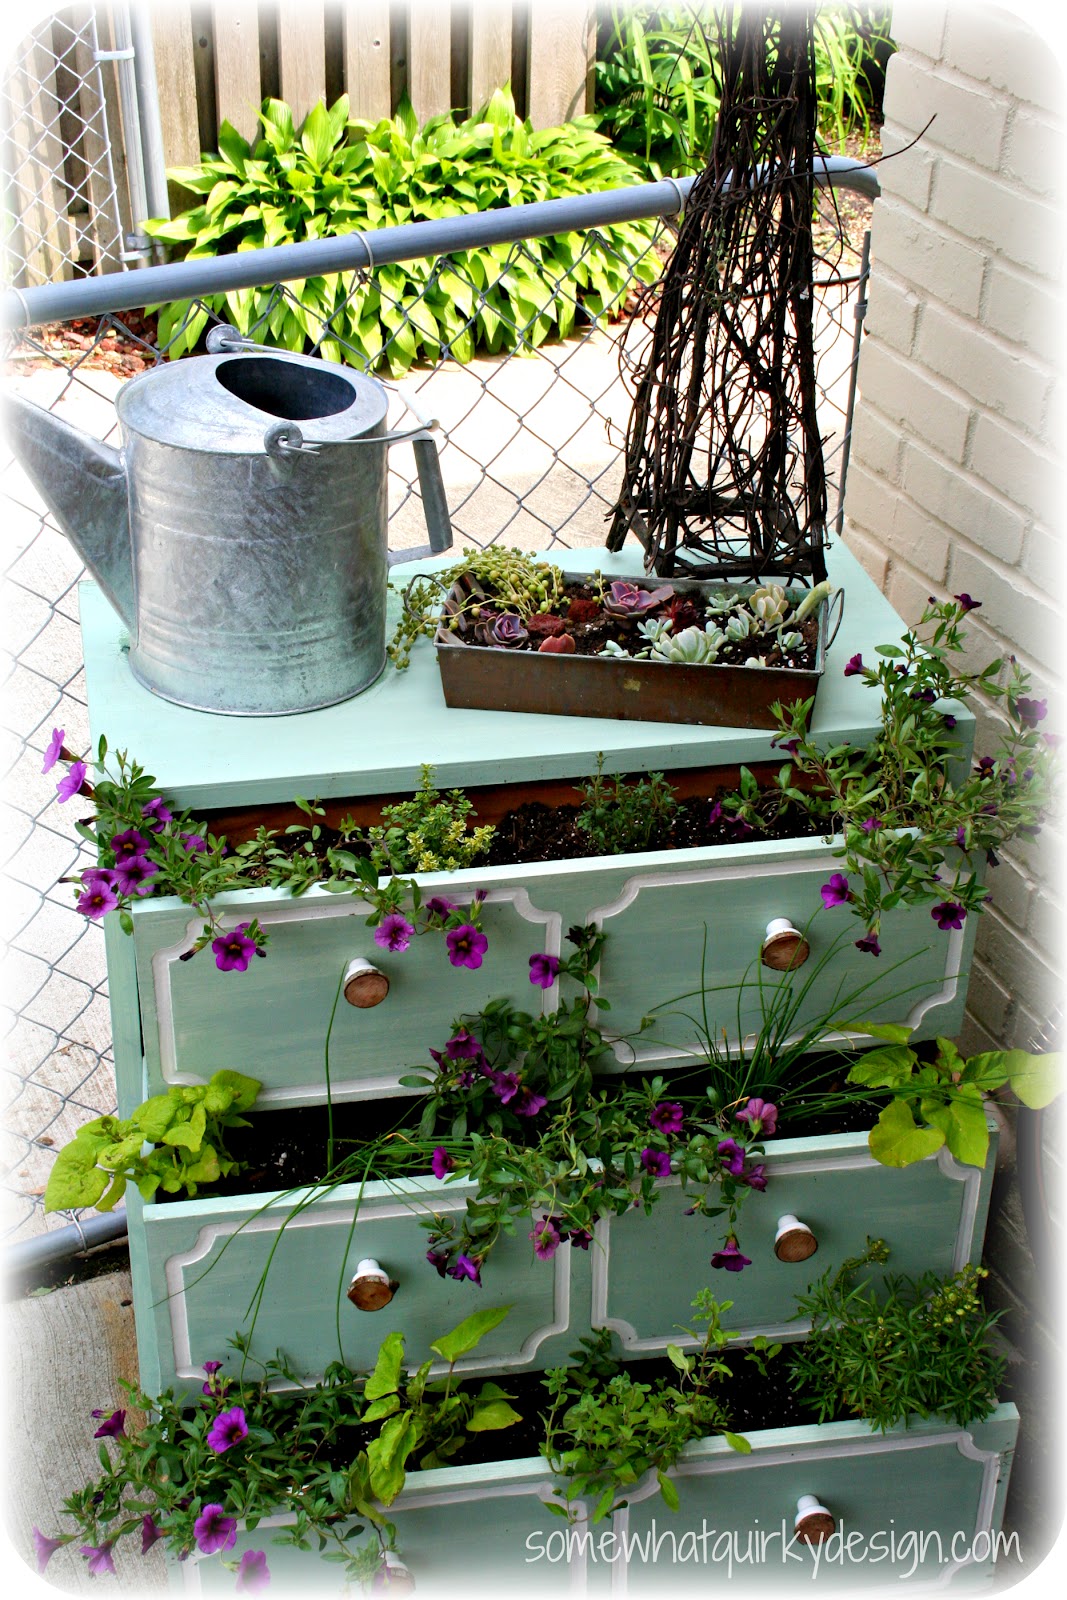 15 Beautiful DIY Garden Projects You Need To Craft This Spring